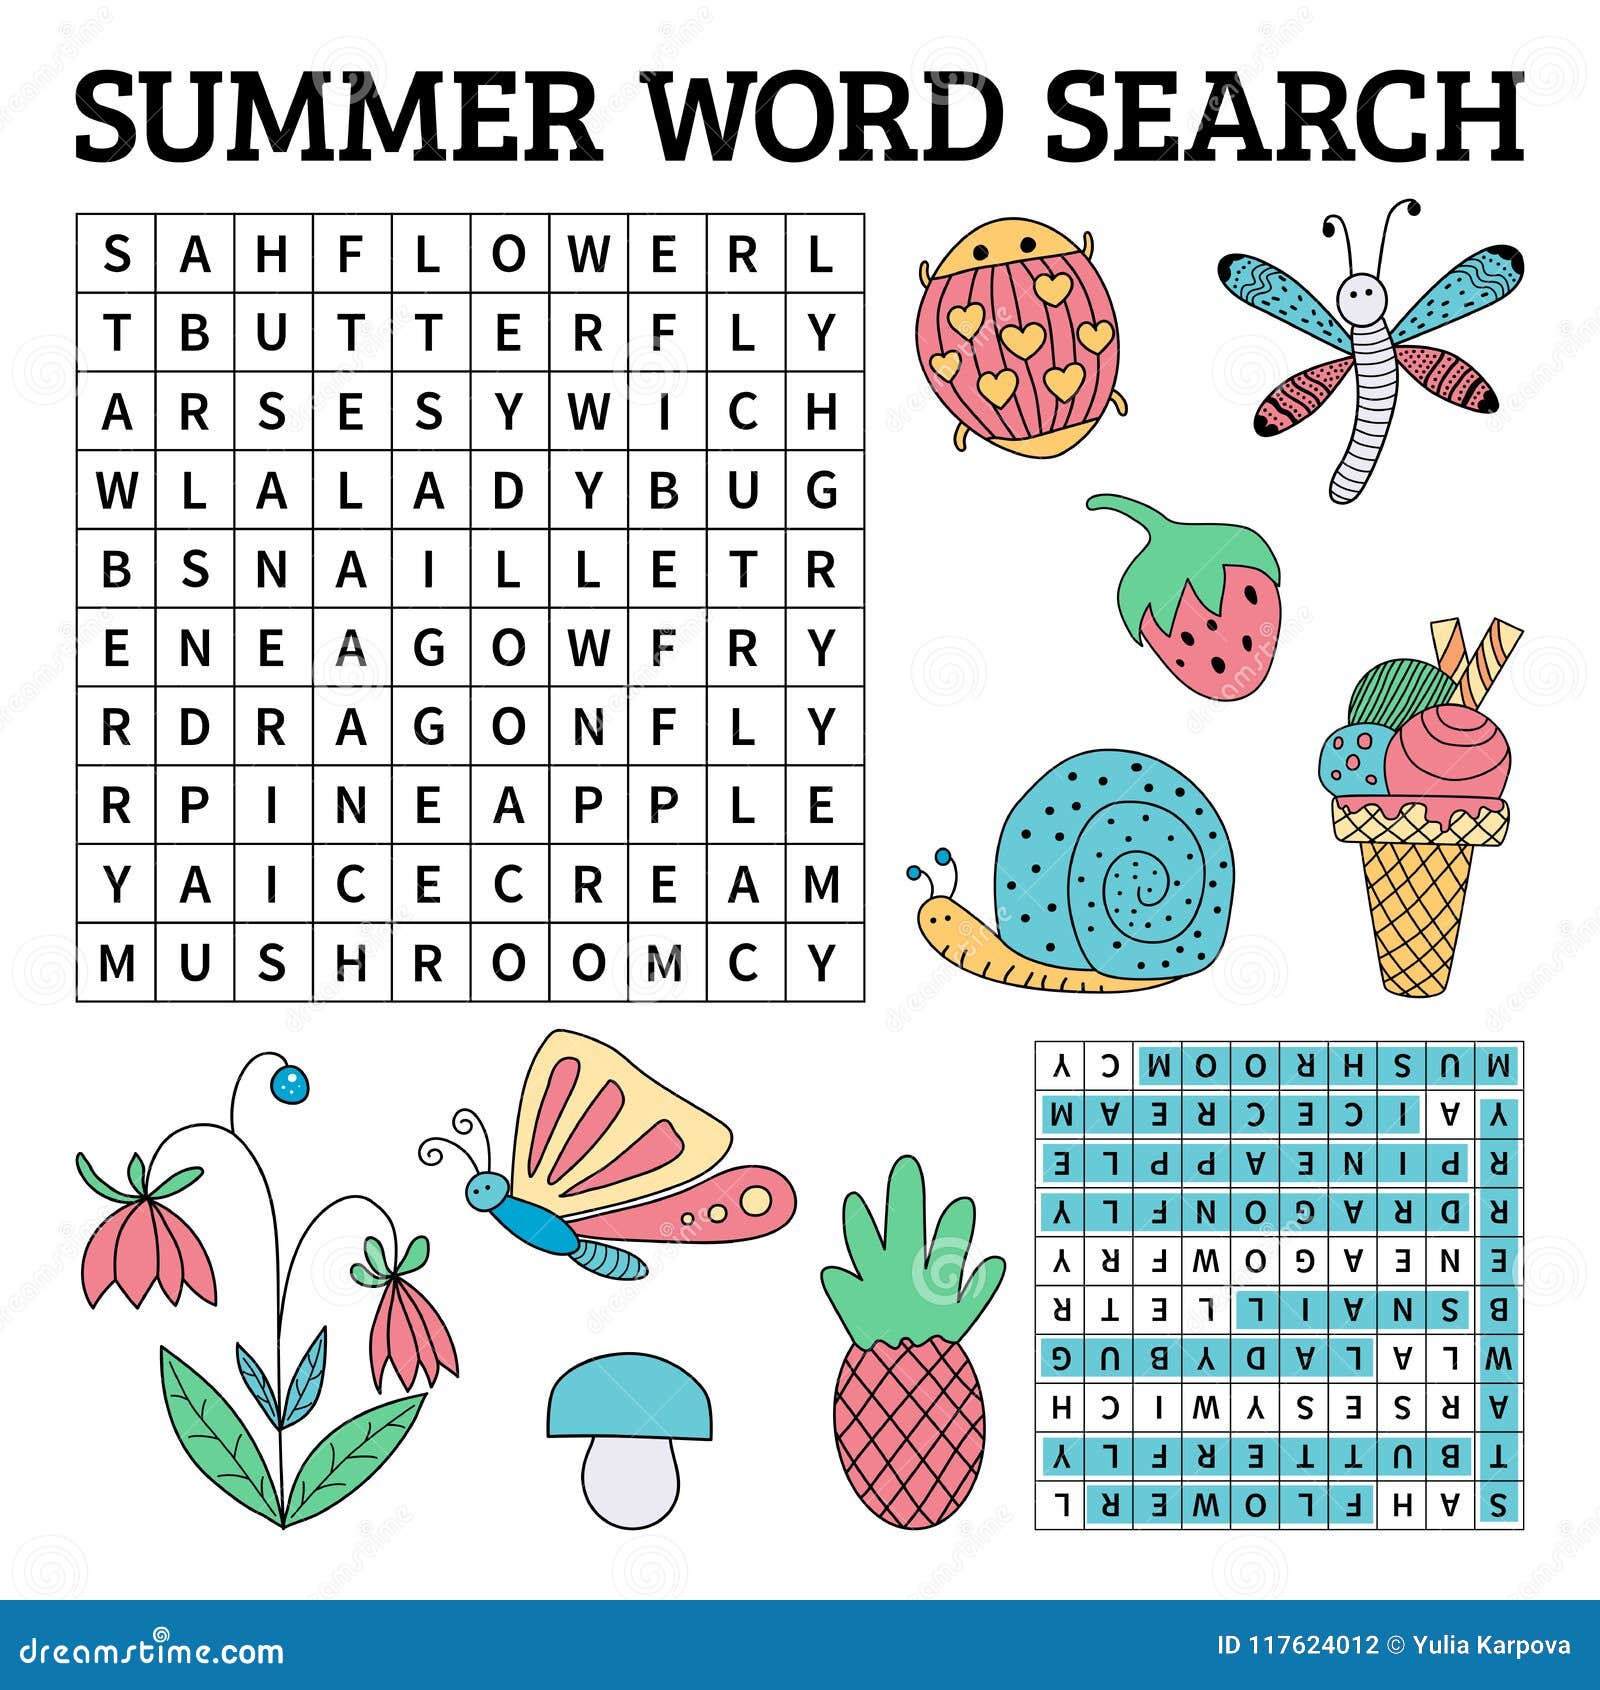 Online Word Games For Your Kids to Play This Summer –